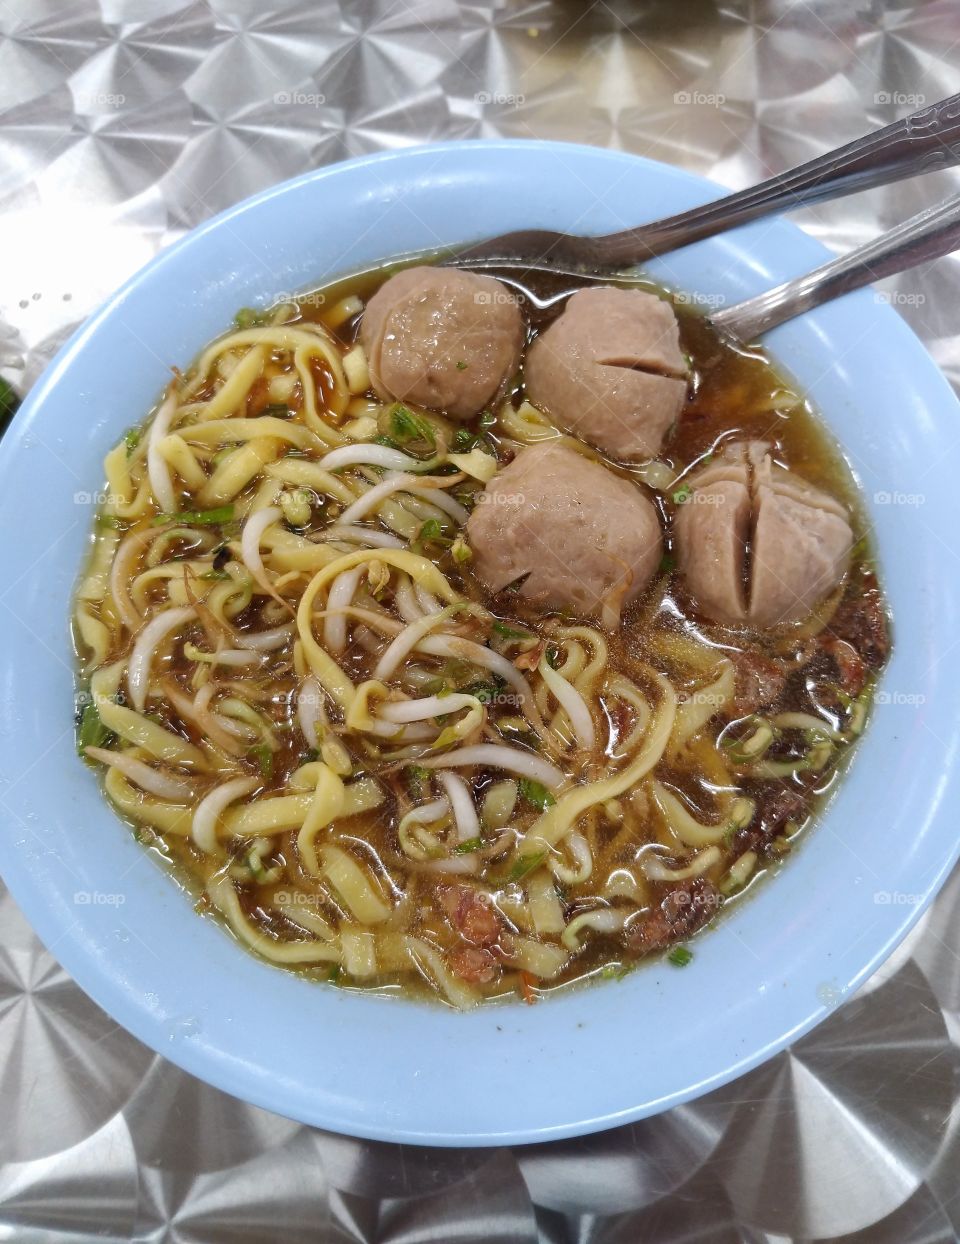 Noodles and meatballs